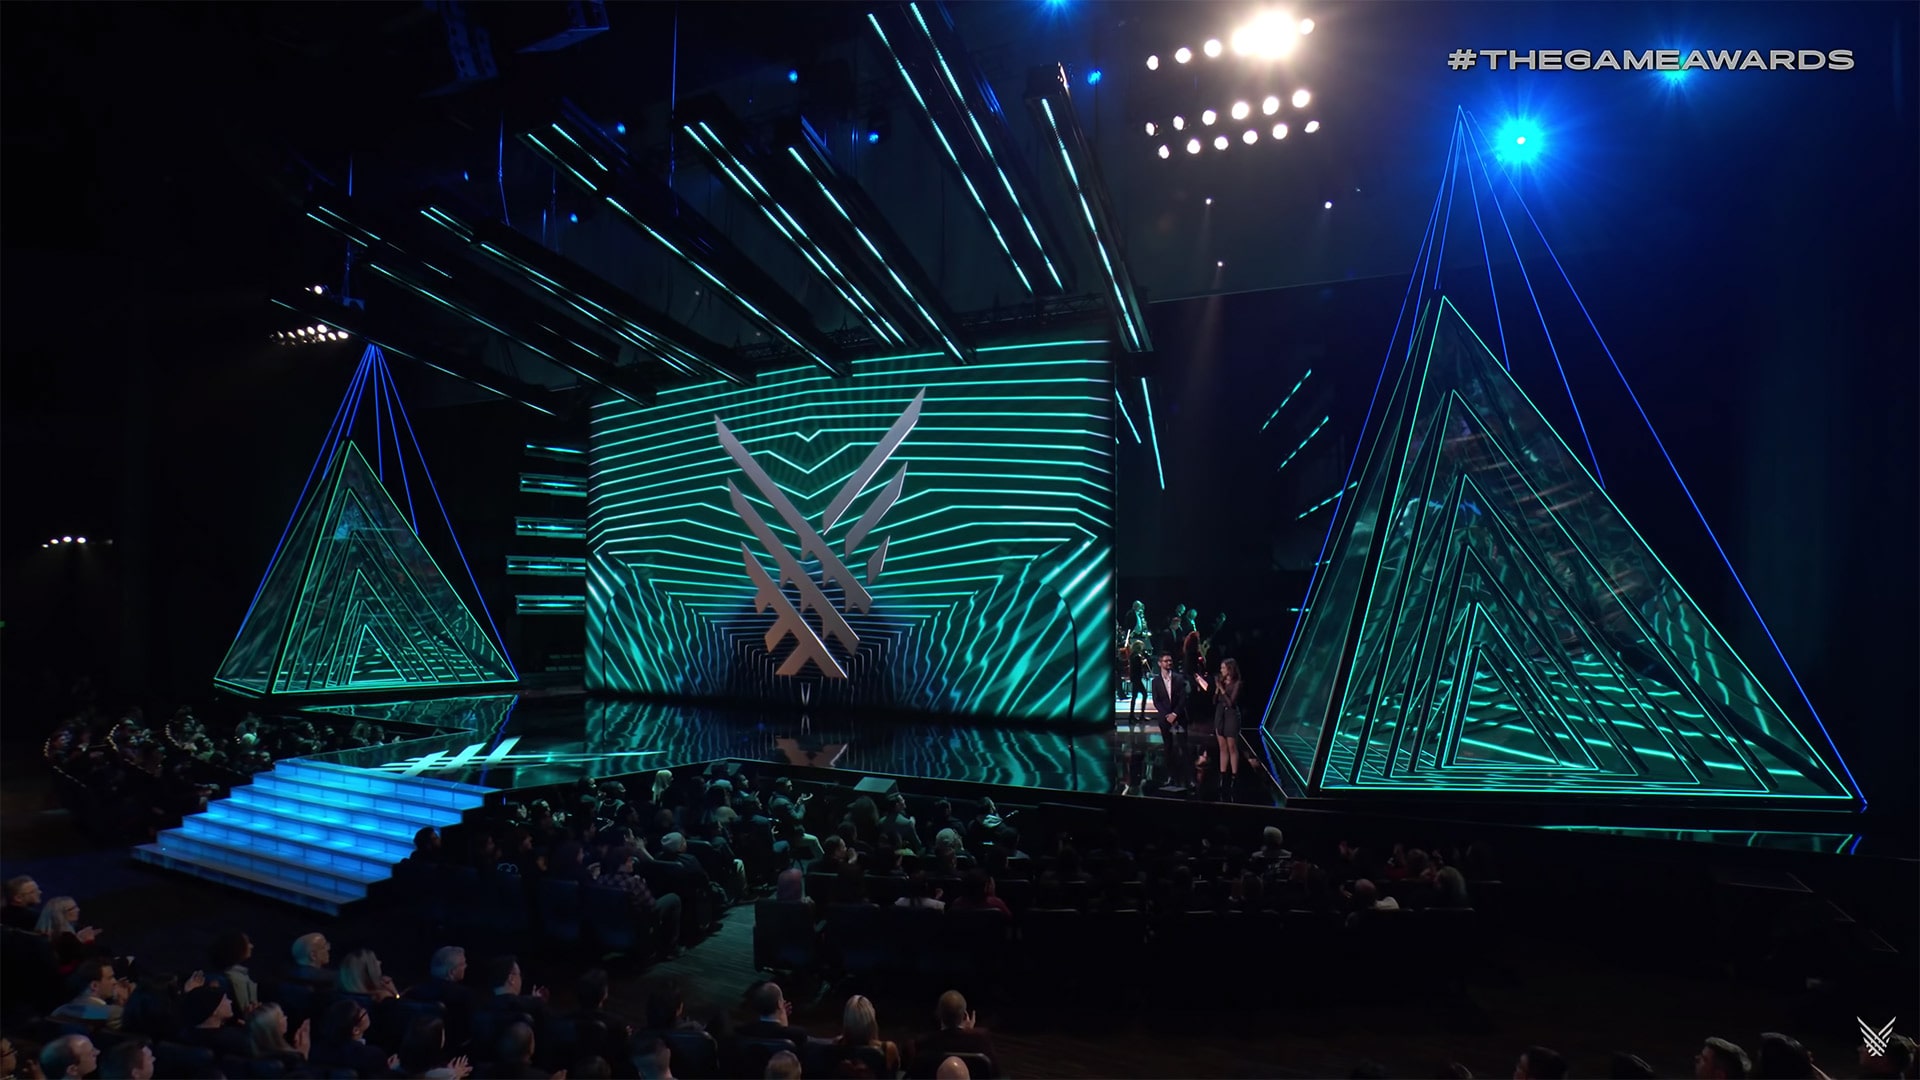 An image of the stage at The Game Awards event, showing how the event can continue its accessibility year after year